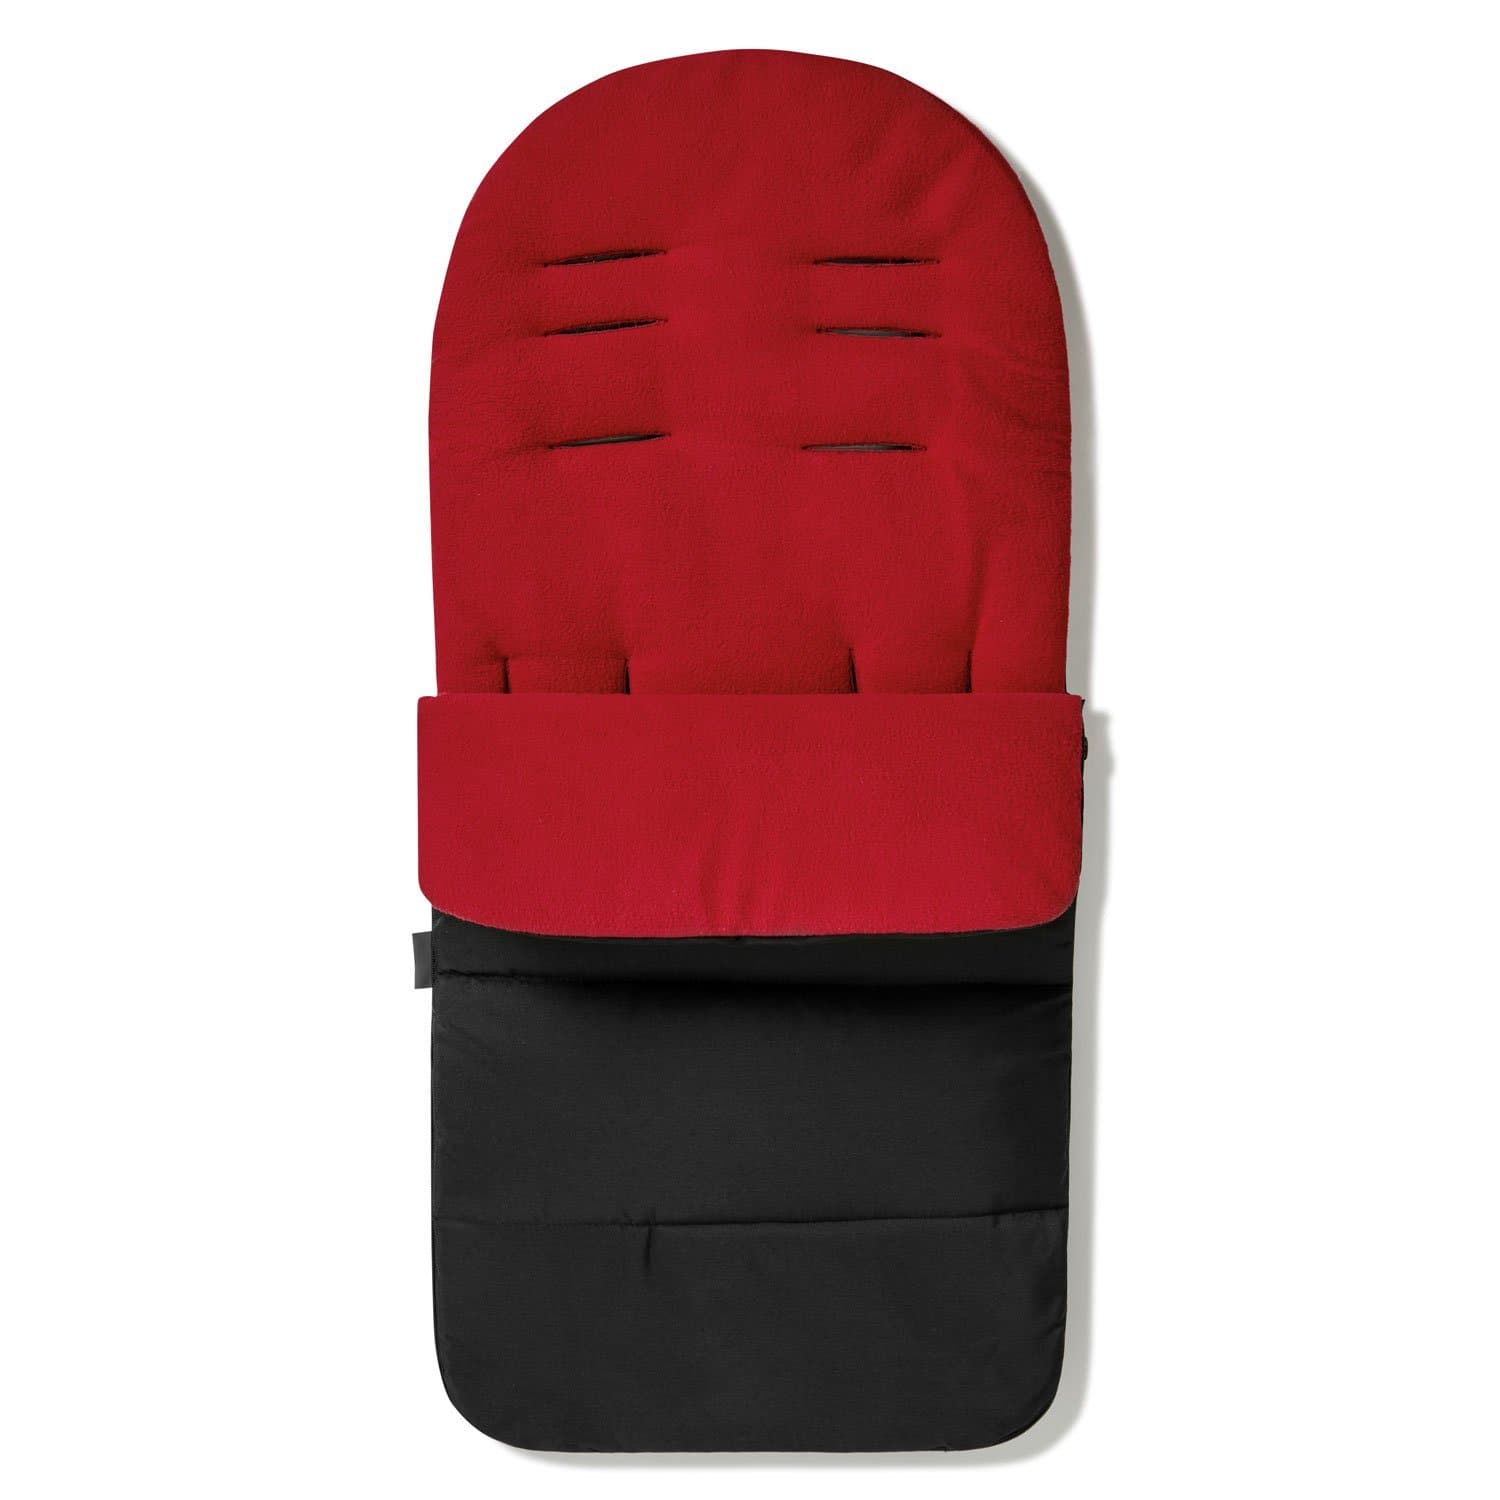 Premium Footmuff / Cosy Toes Compatible with Brevi - Fire Red / Fits All Models | For Your Little One